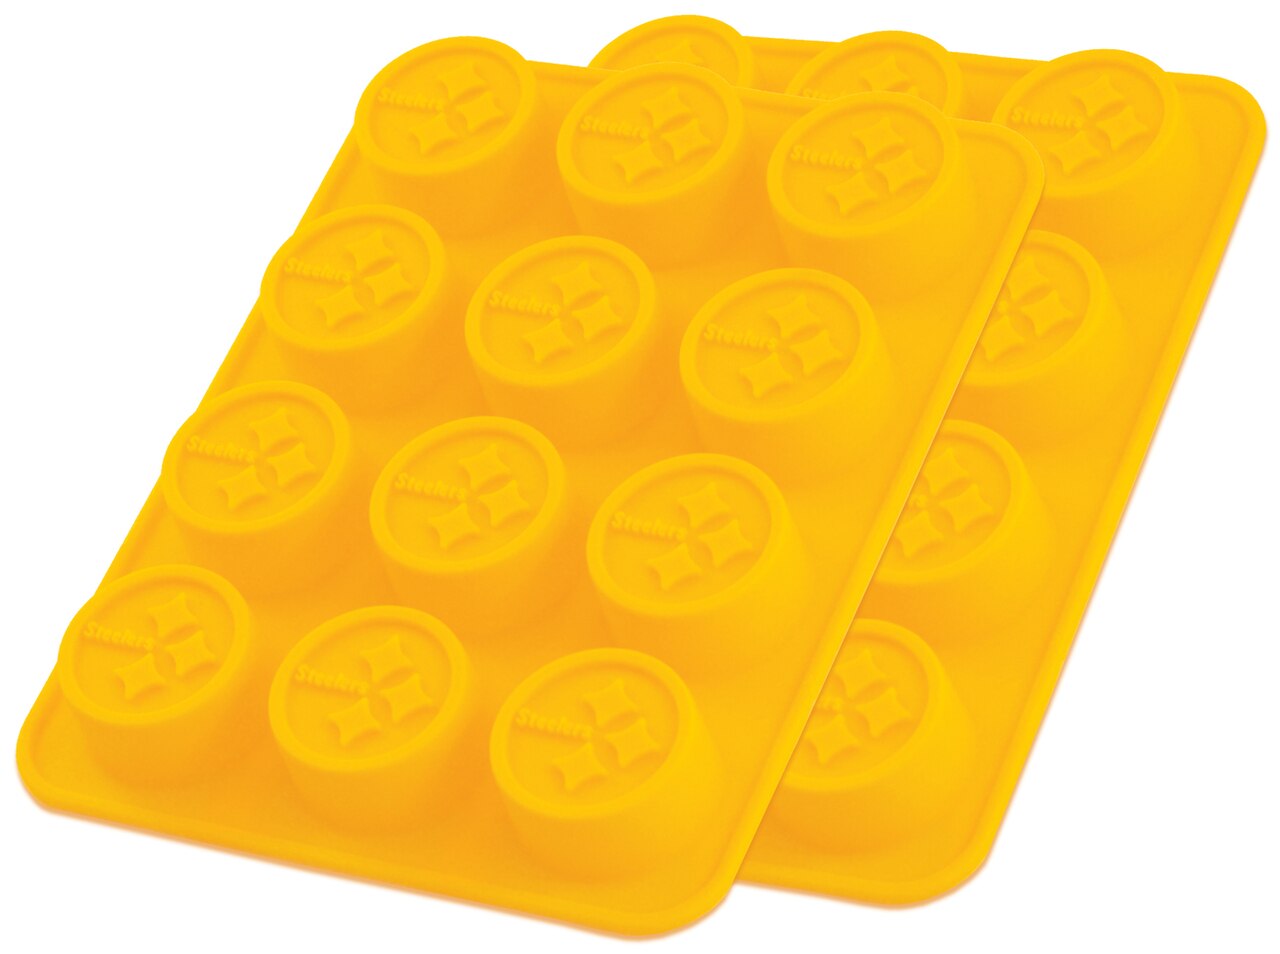 Ice Cube Trays & Molds for sale in Wichita, Kansas